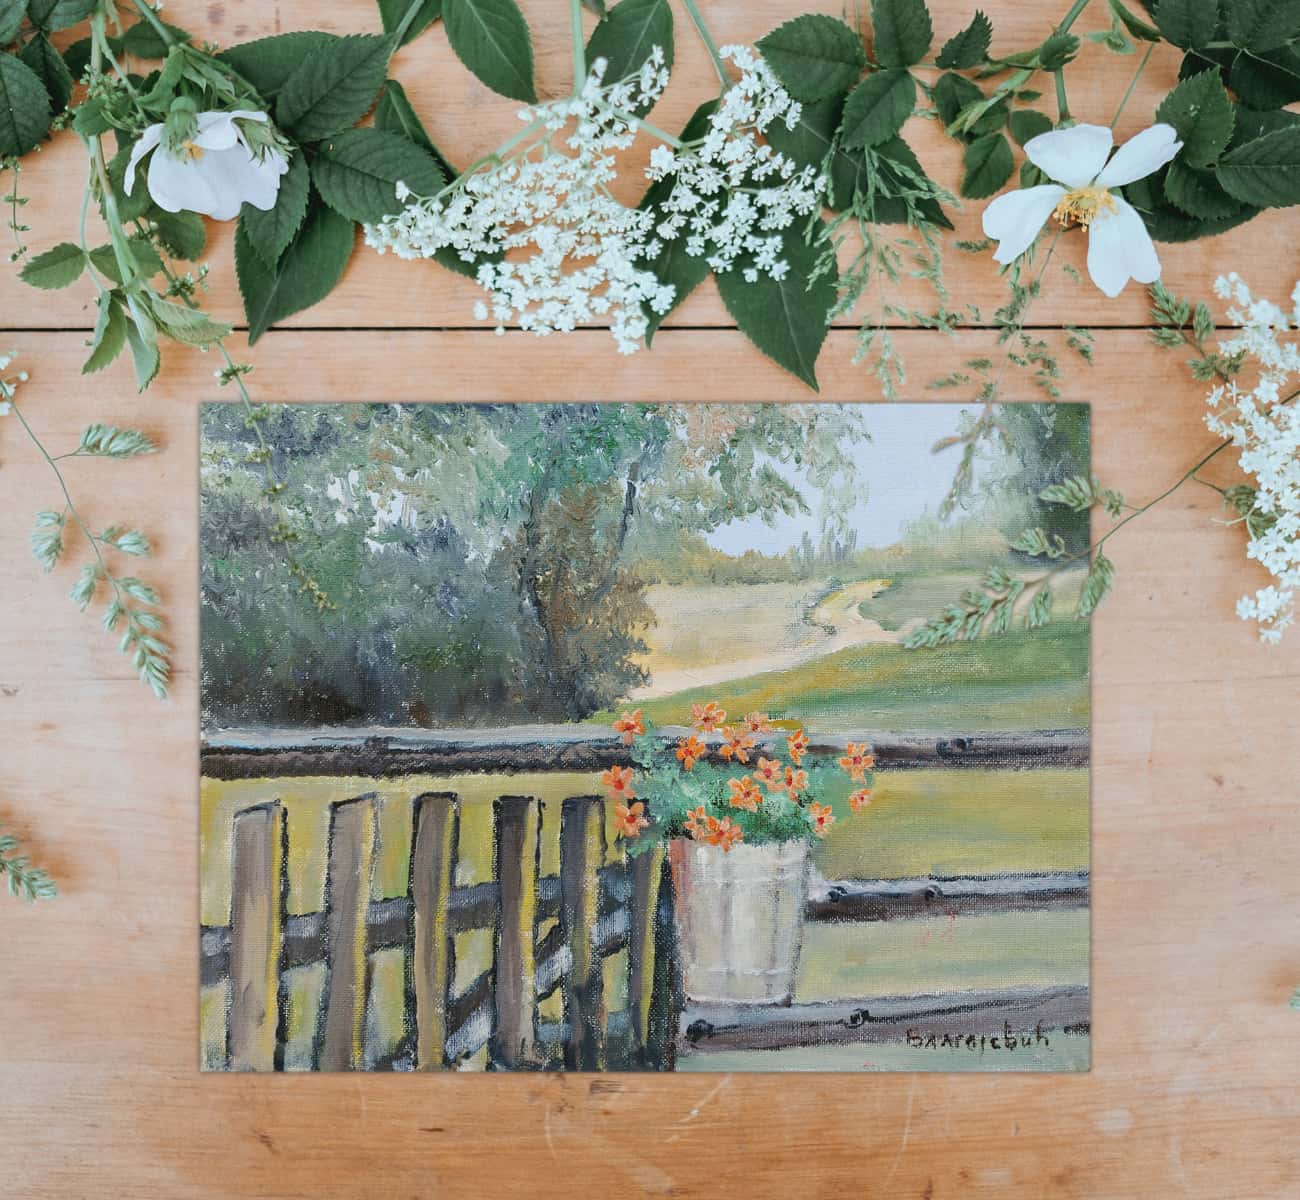 Greeting card depicting country flowers in a bucket hung on the country fence laid on top of the dried stems with tiny white flowers.